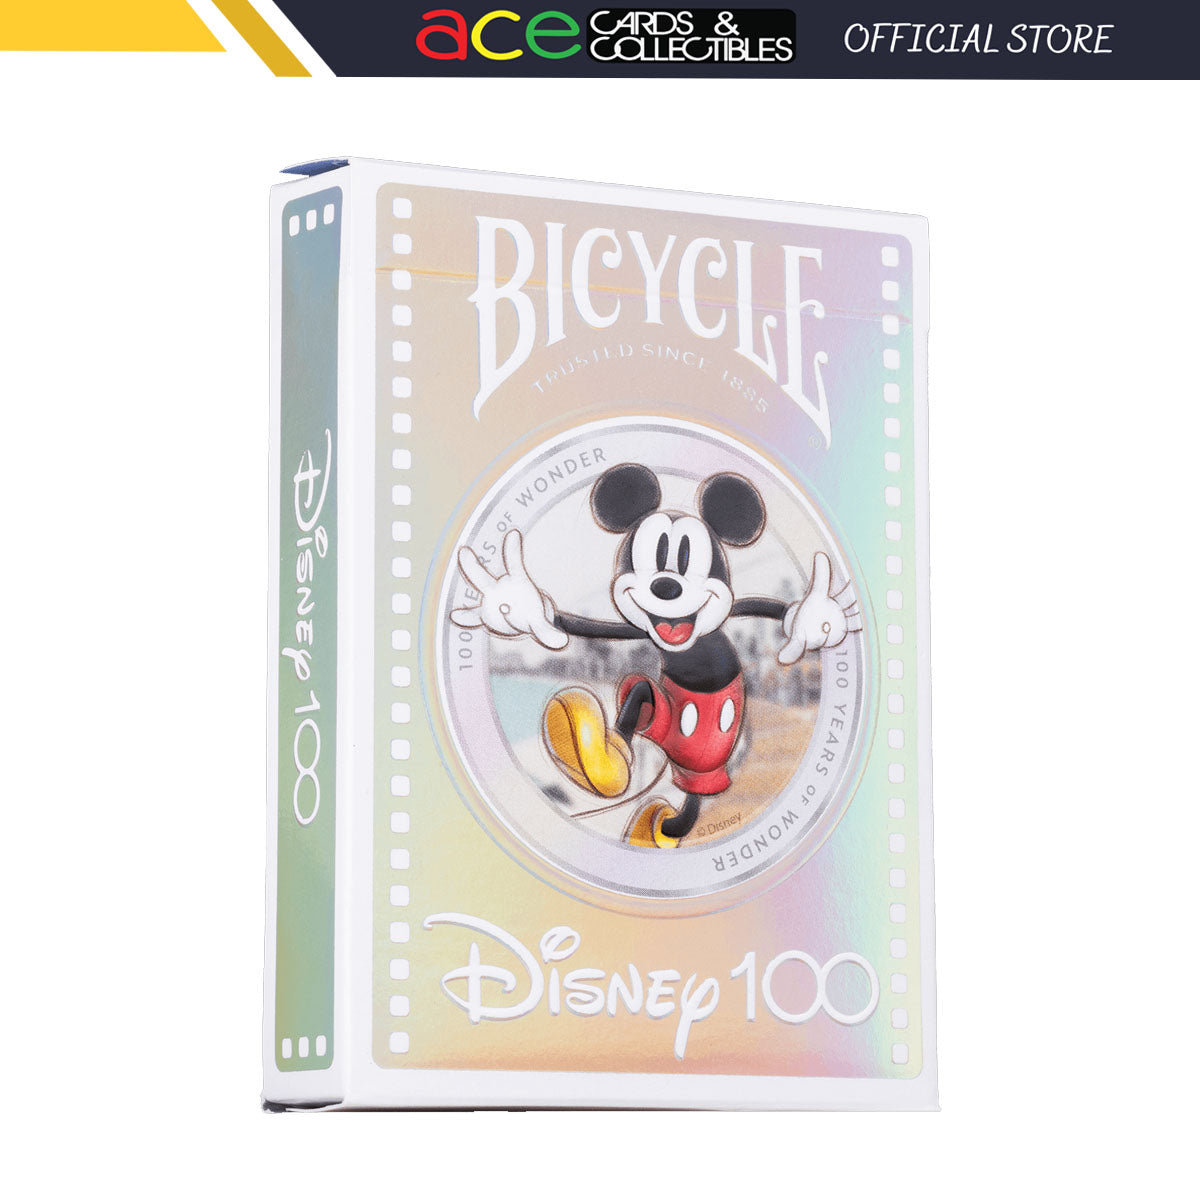 Bicycle Disney 100 Playing Cards-United States Playing Cards Company-Ace Cards & Collectibles